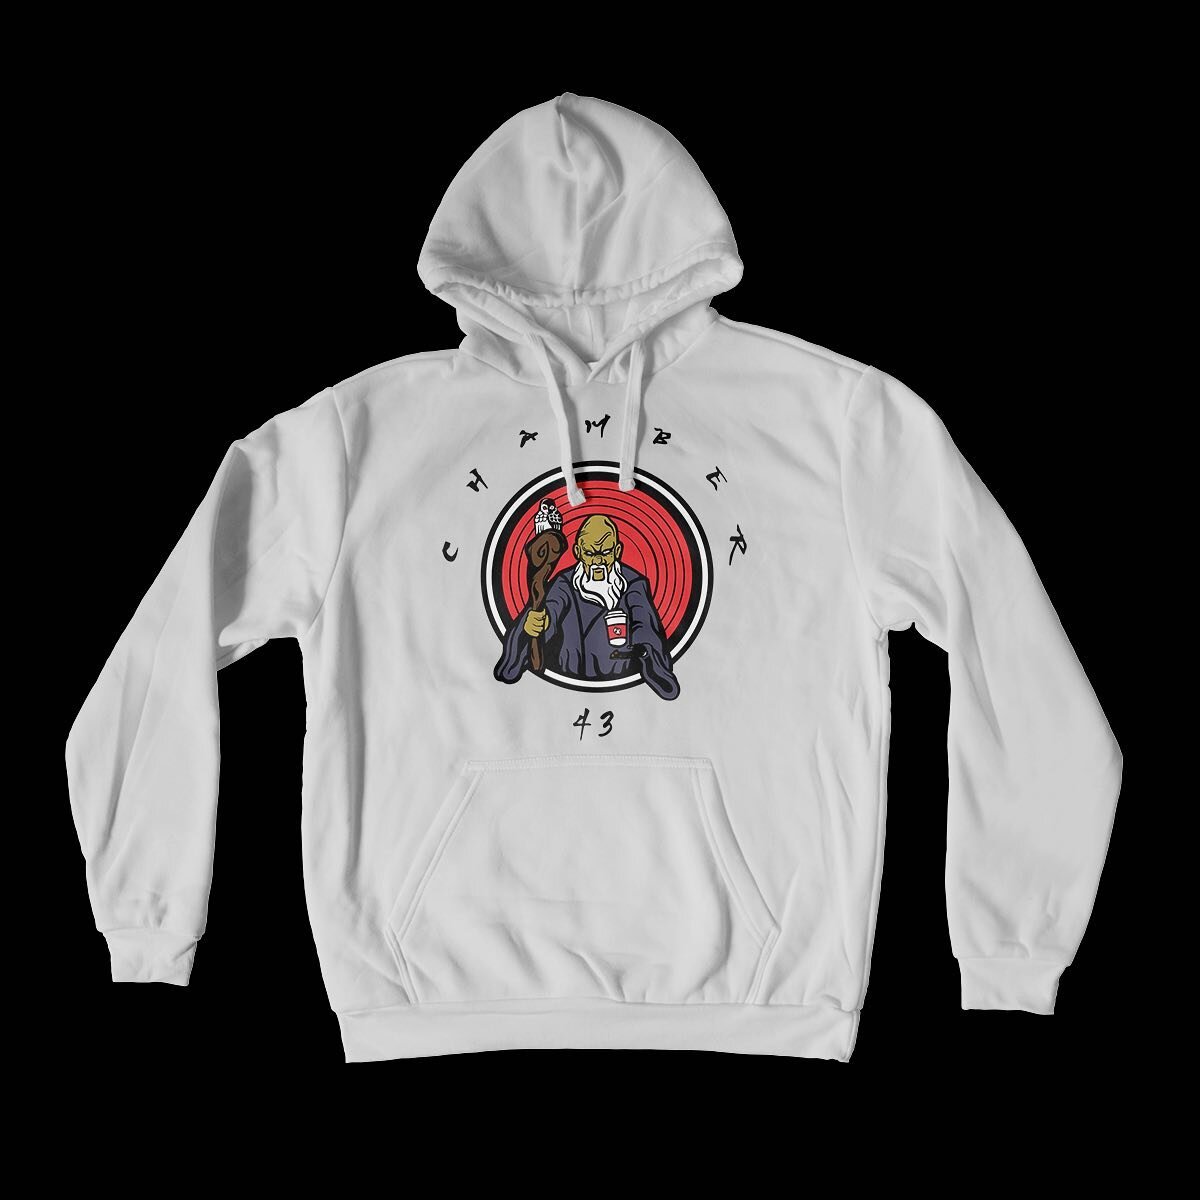 Our LTD Edition 2021 Hoodies w/ the Coffee House Wizard Variant are live on our site right now! Each order will include a Chamber 43 coupon and will be stamped as 1st edition! We will not pre reprinting this version. Orders are in-store pick up only,